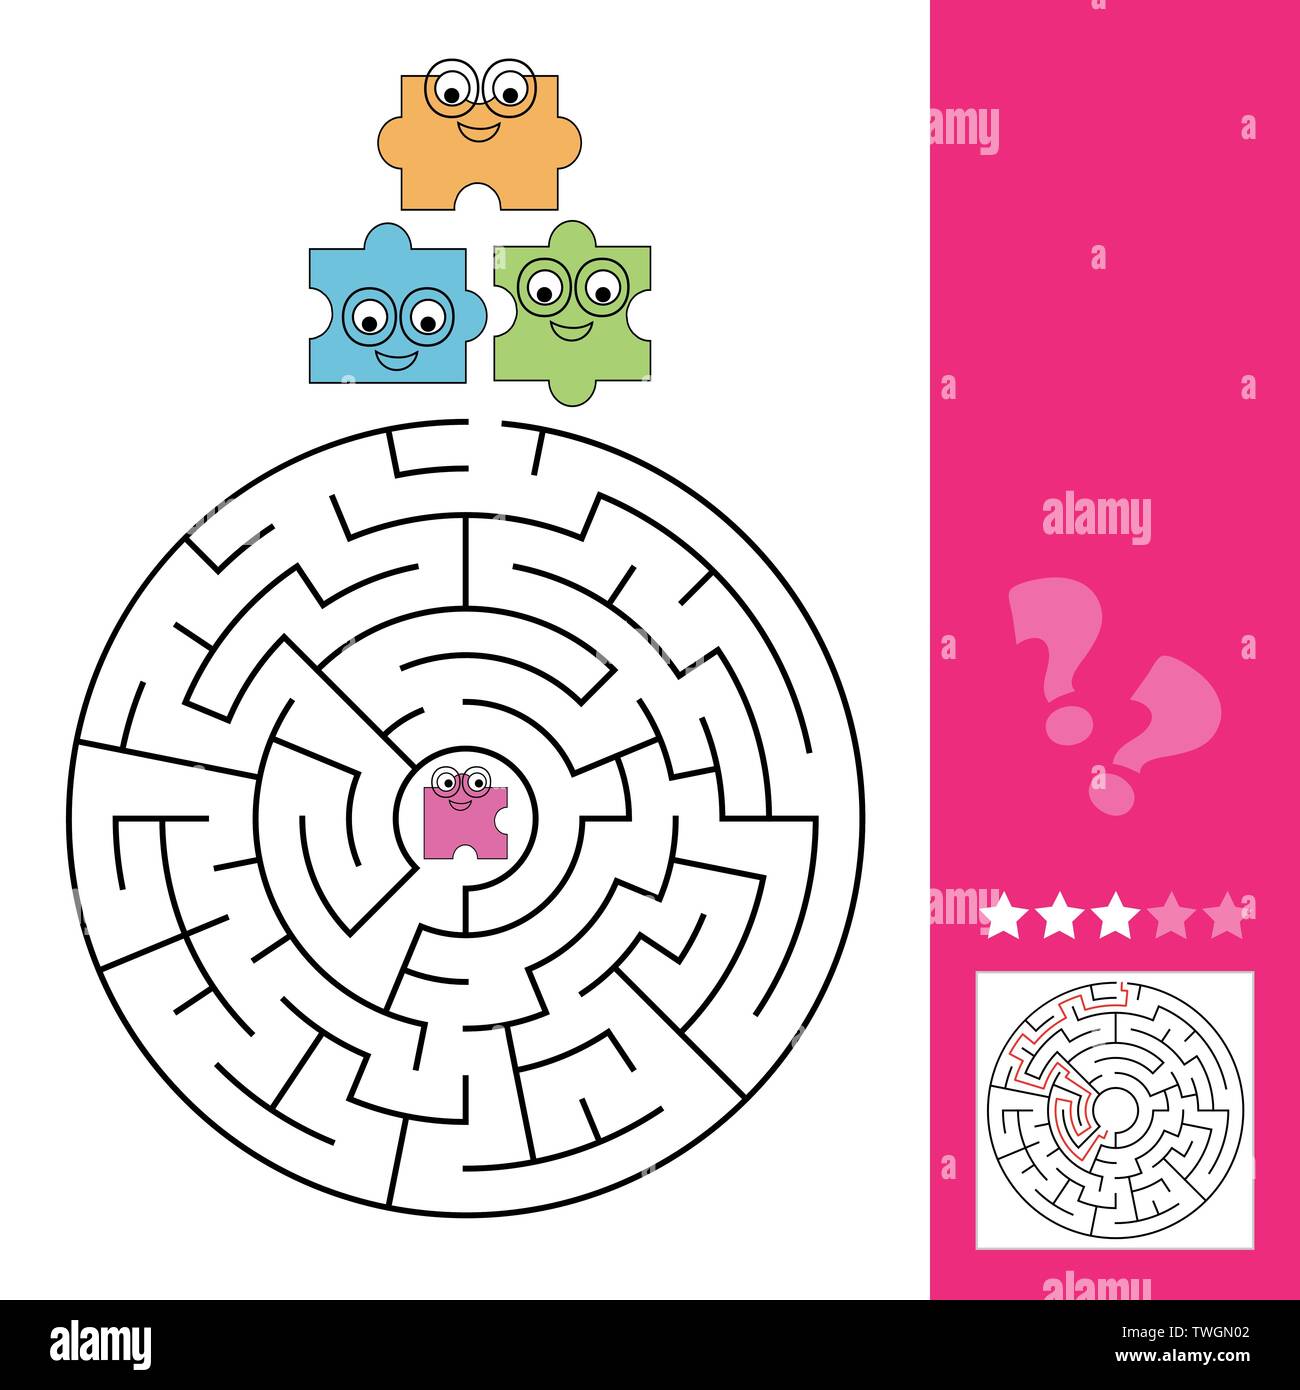 Help the puzzle piece to find the way to the puzzle, maze game for kids, answer included Stock Vector